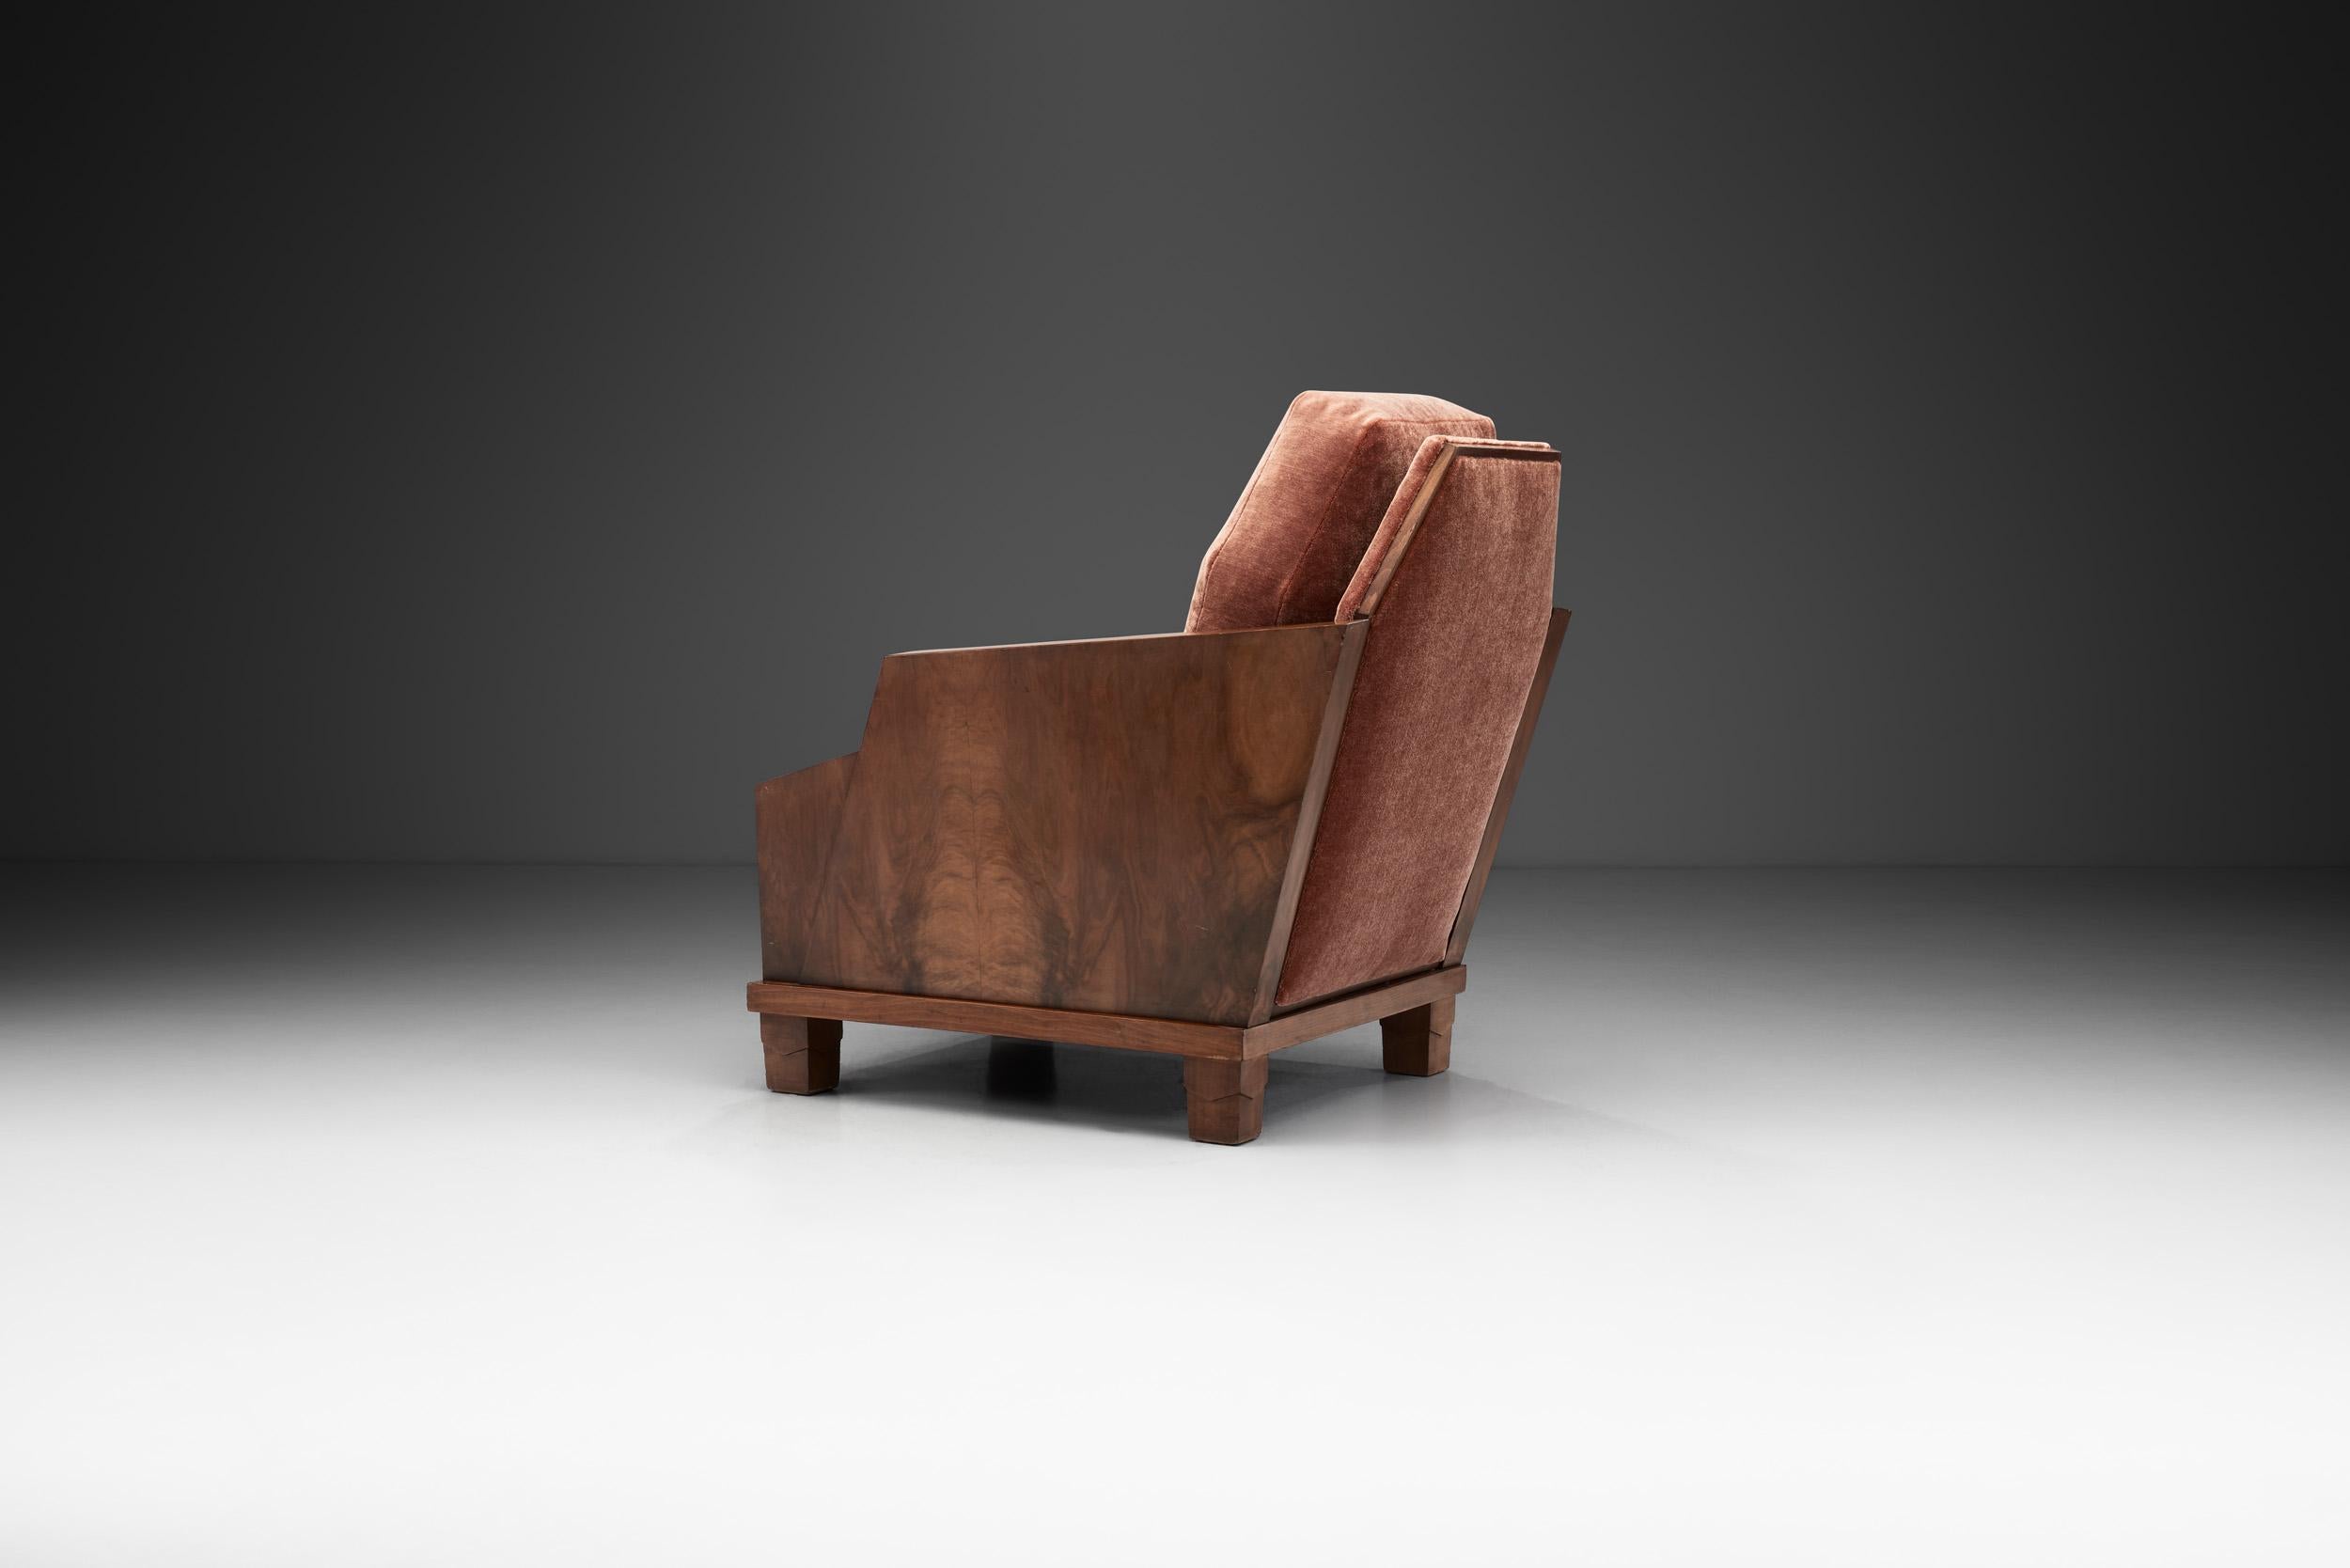 Mid-20th Century French Art Deco Lounge Chair with Walnut Veneer, France, 1930s